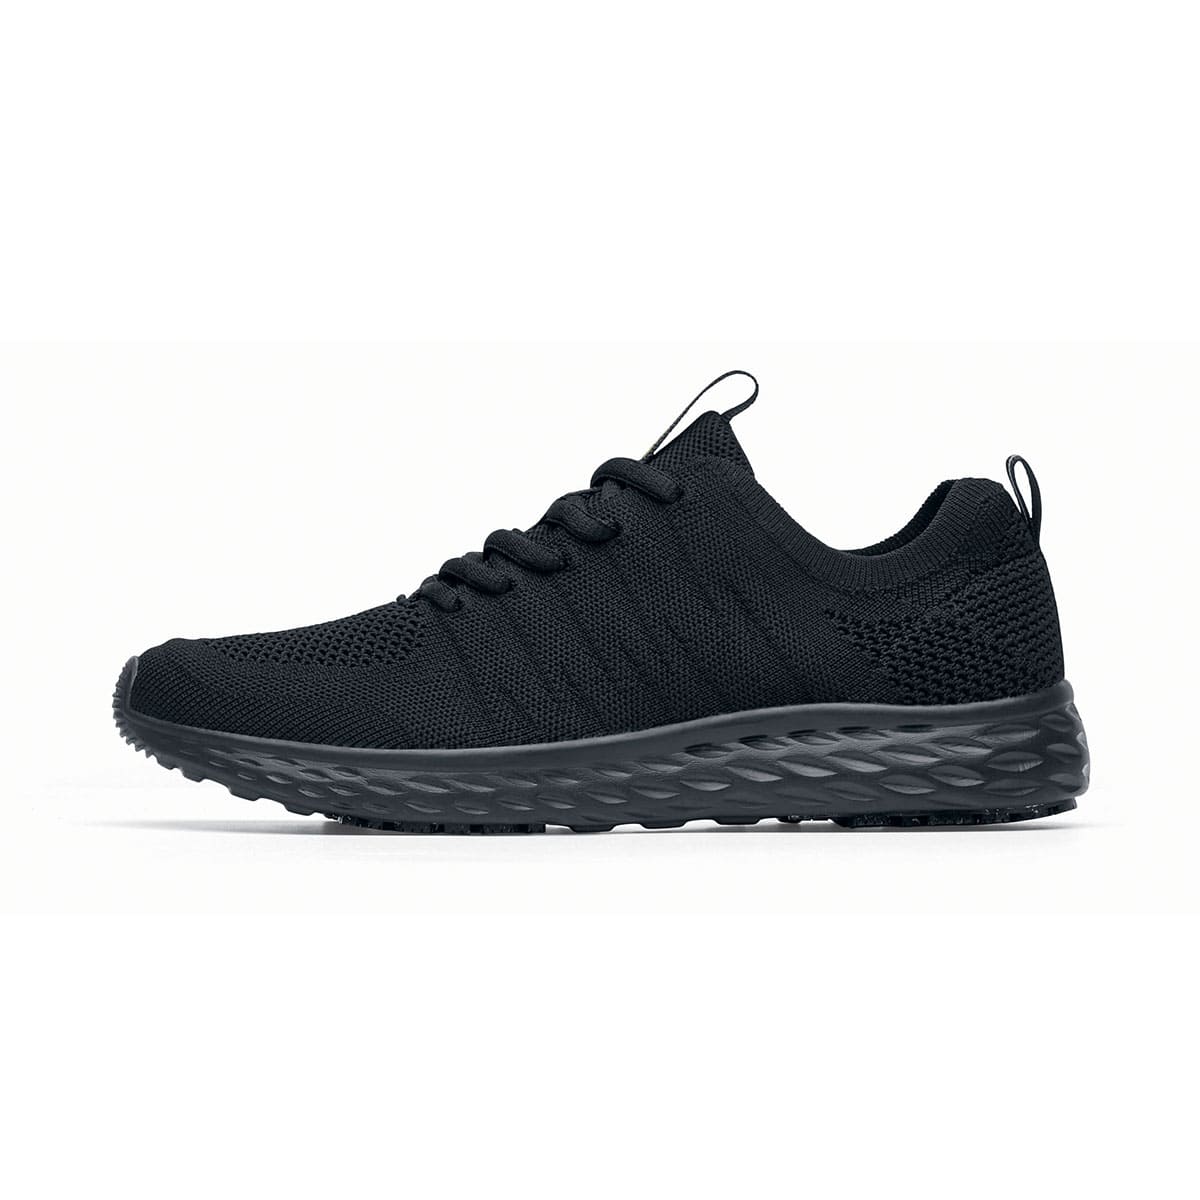 The Everlight™ Eco Men's Black from Shoes For Crews are slip-resistant trainers built with a recycled mesh upper that is water-resistant and breathable. Designed to keep your feet cool and ventilated, seen from the left.